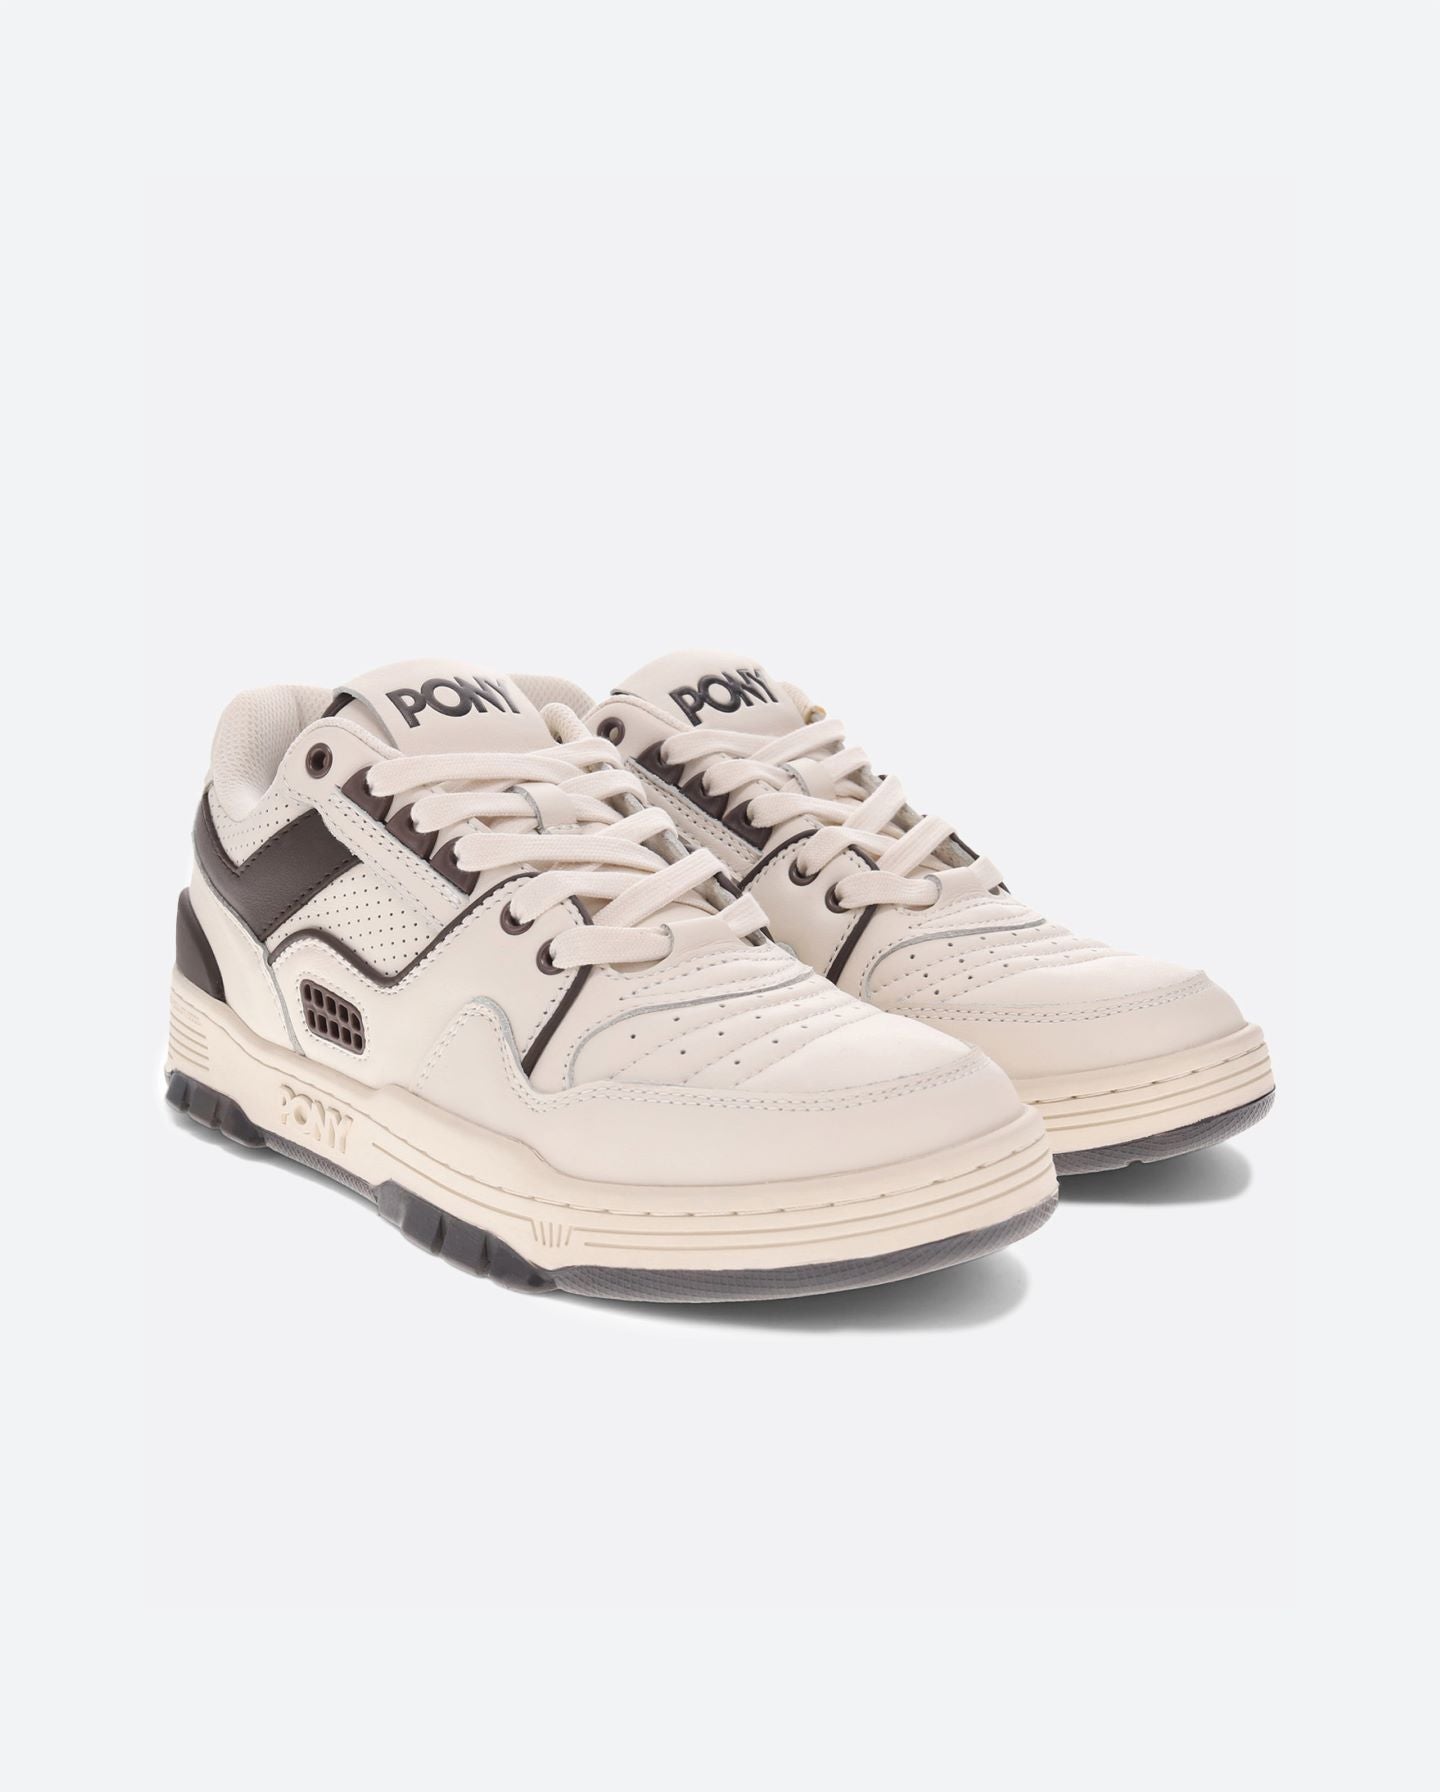 OFF WHITE/BROWN M-100 LOW